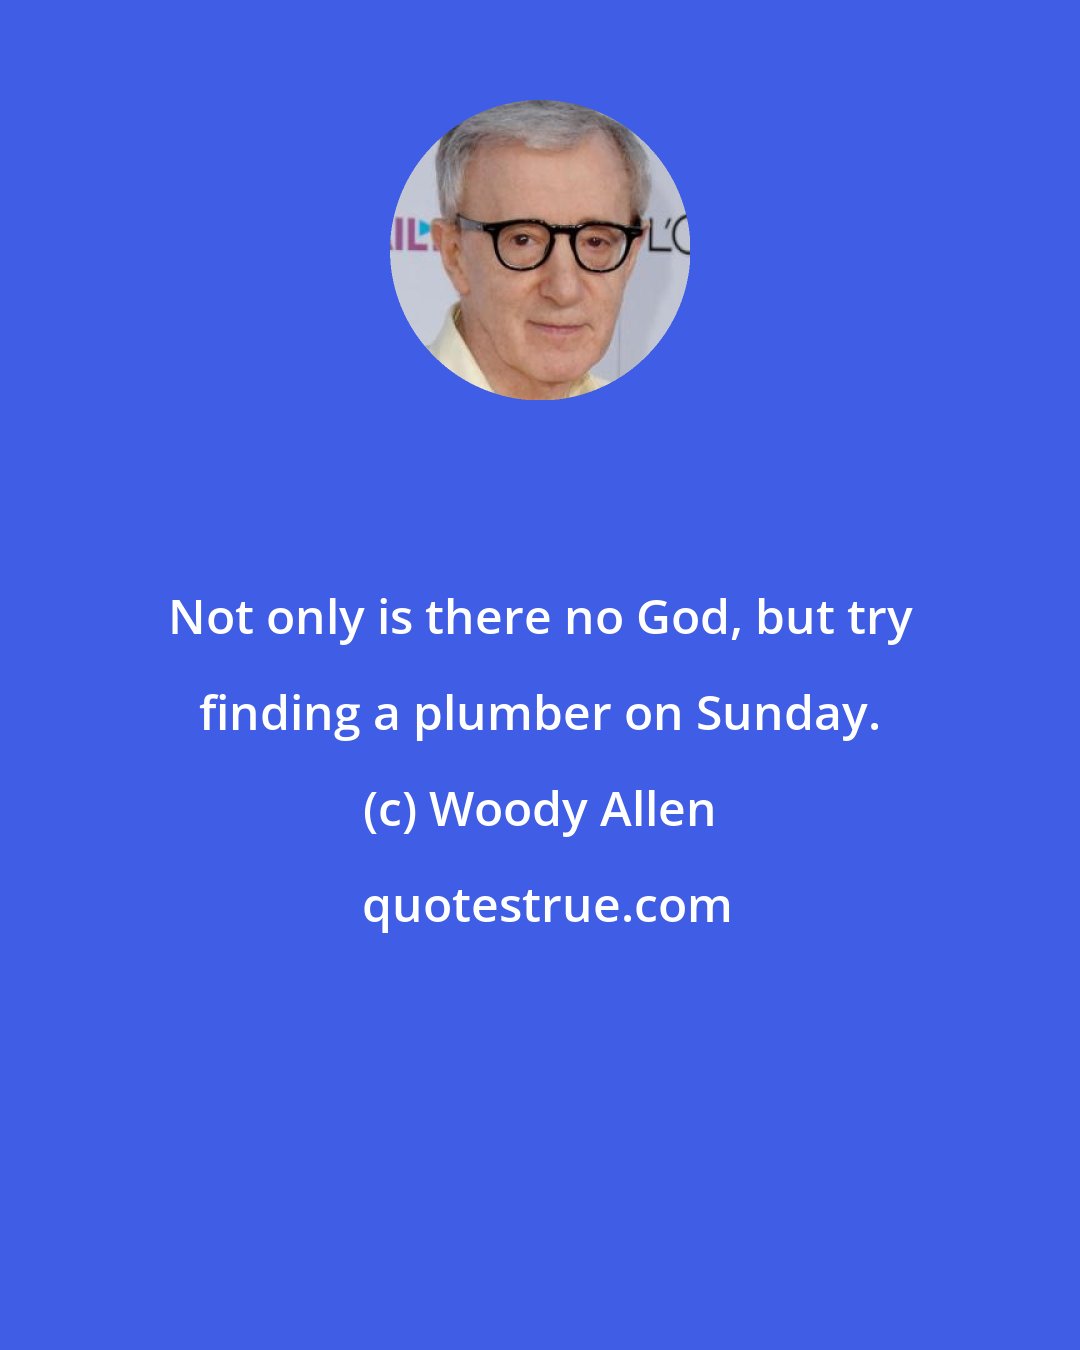 Woody Allen: Not only is there no God, but try finding a plumber on Sunday.